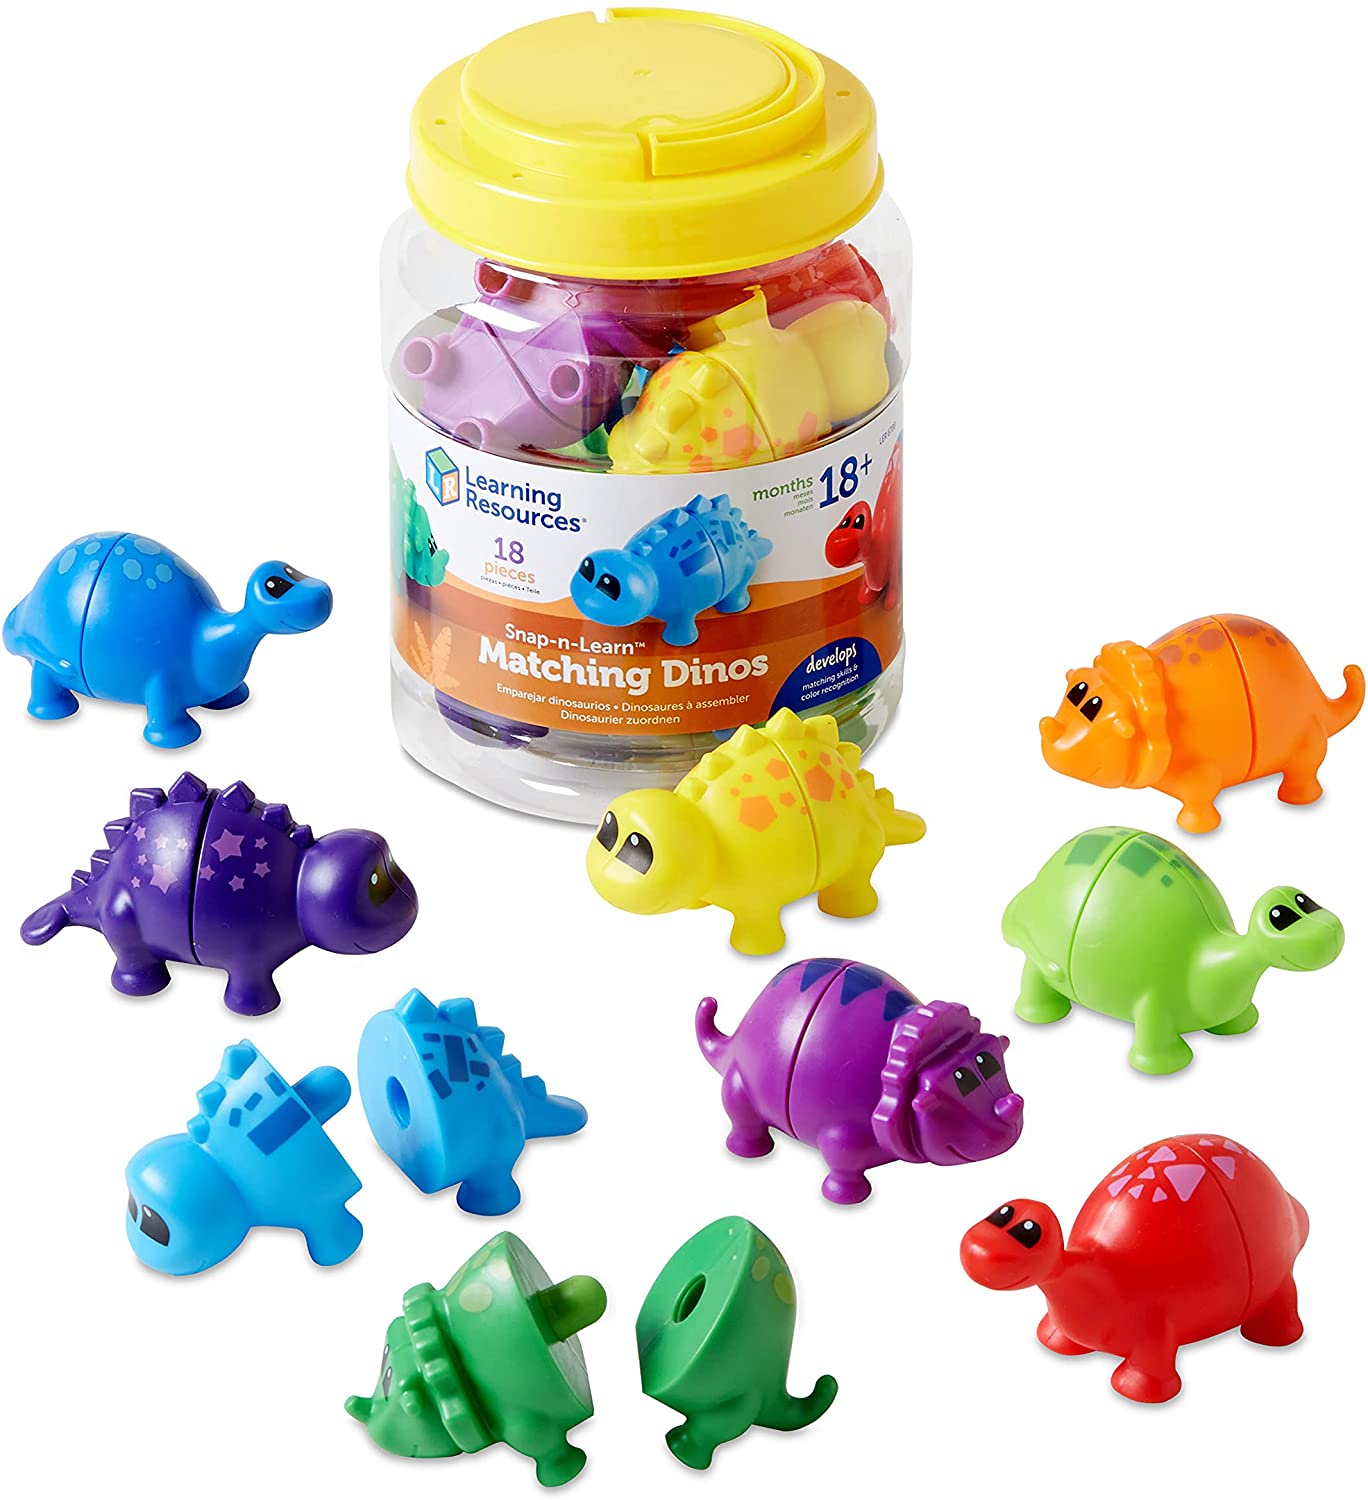 Snap & Learn Counting Dinosaurs